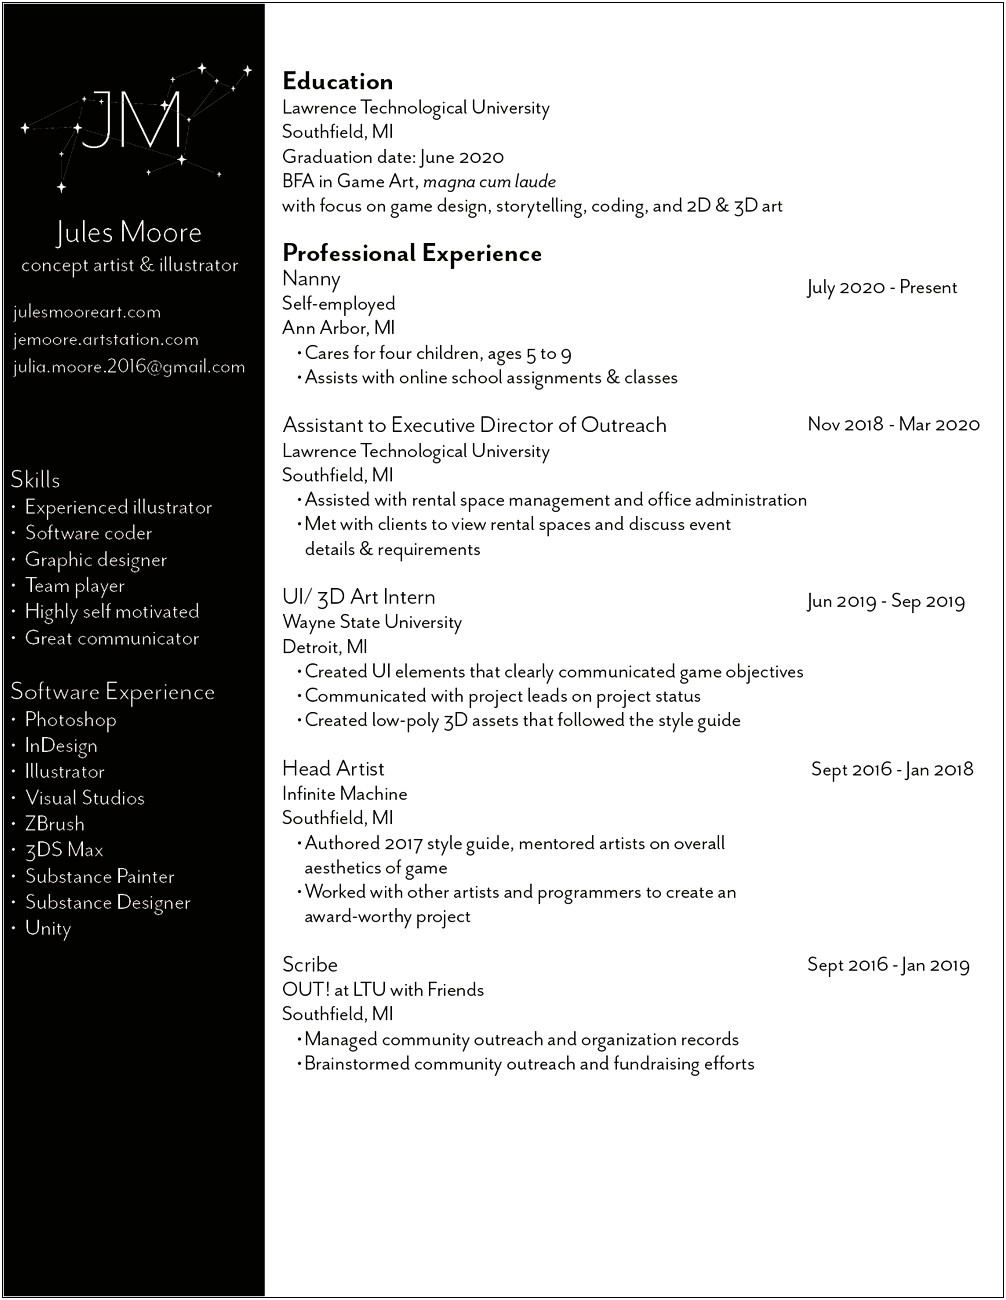 Authored Created Or Managed On A Resume